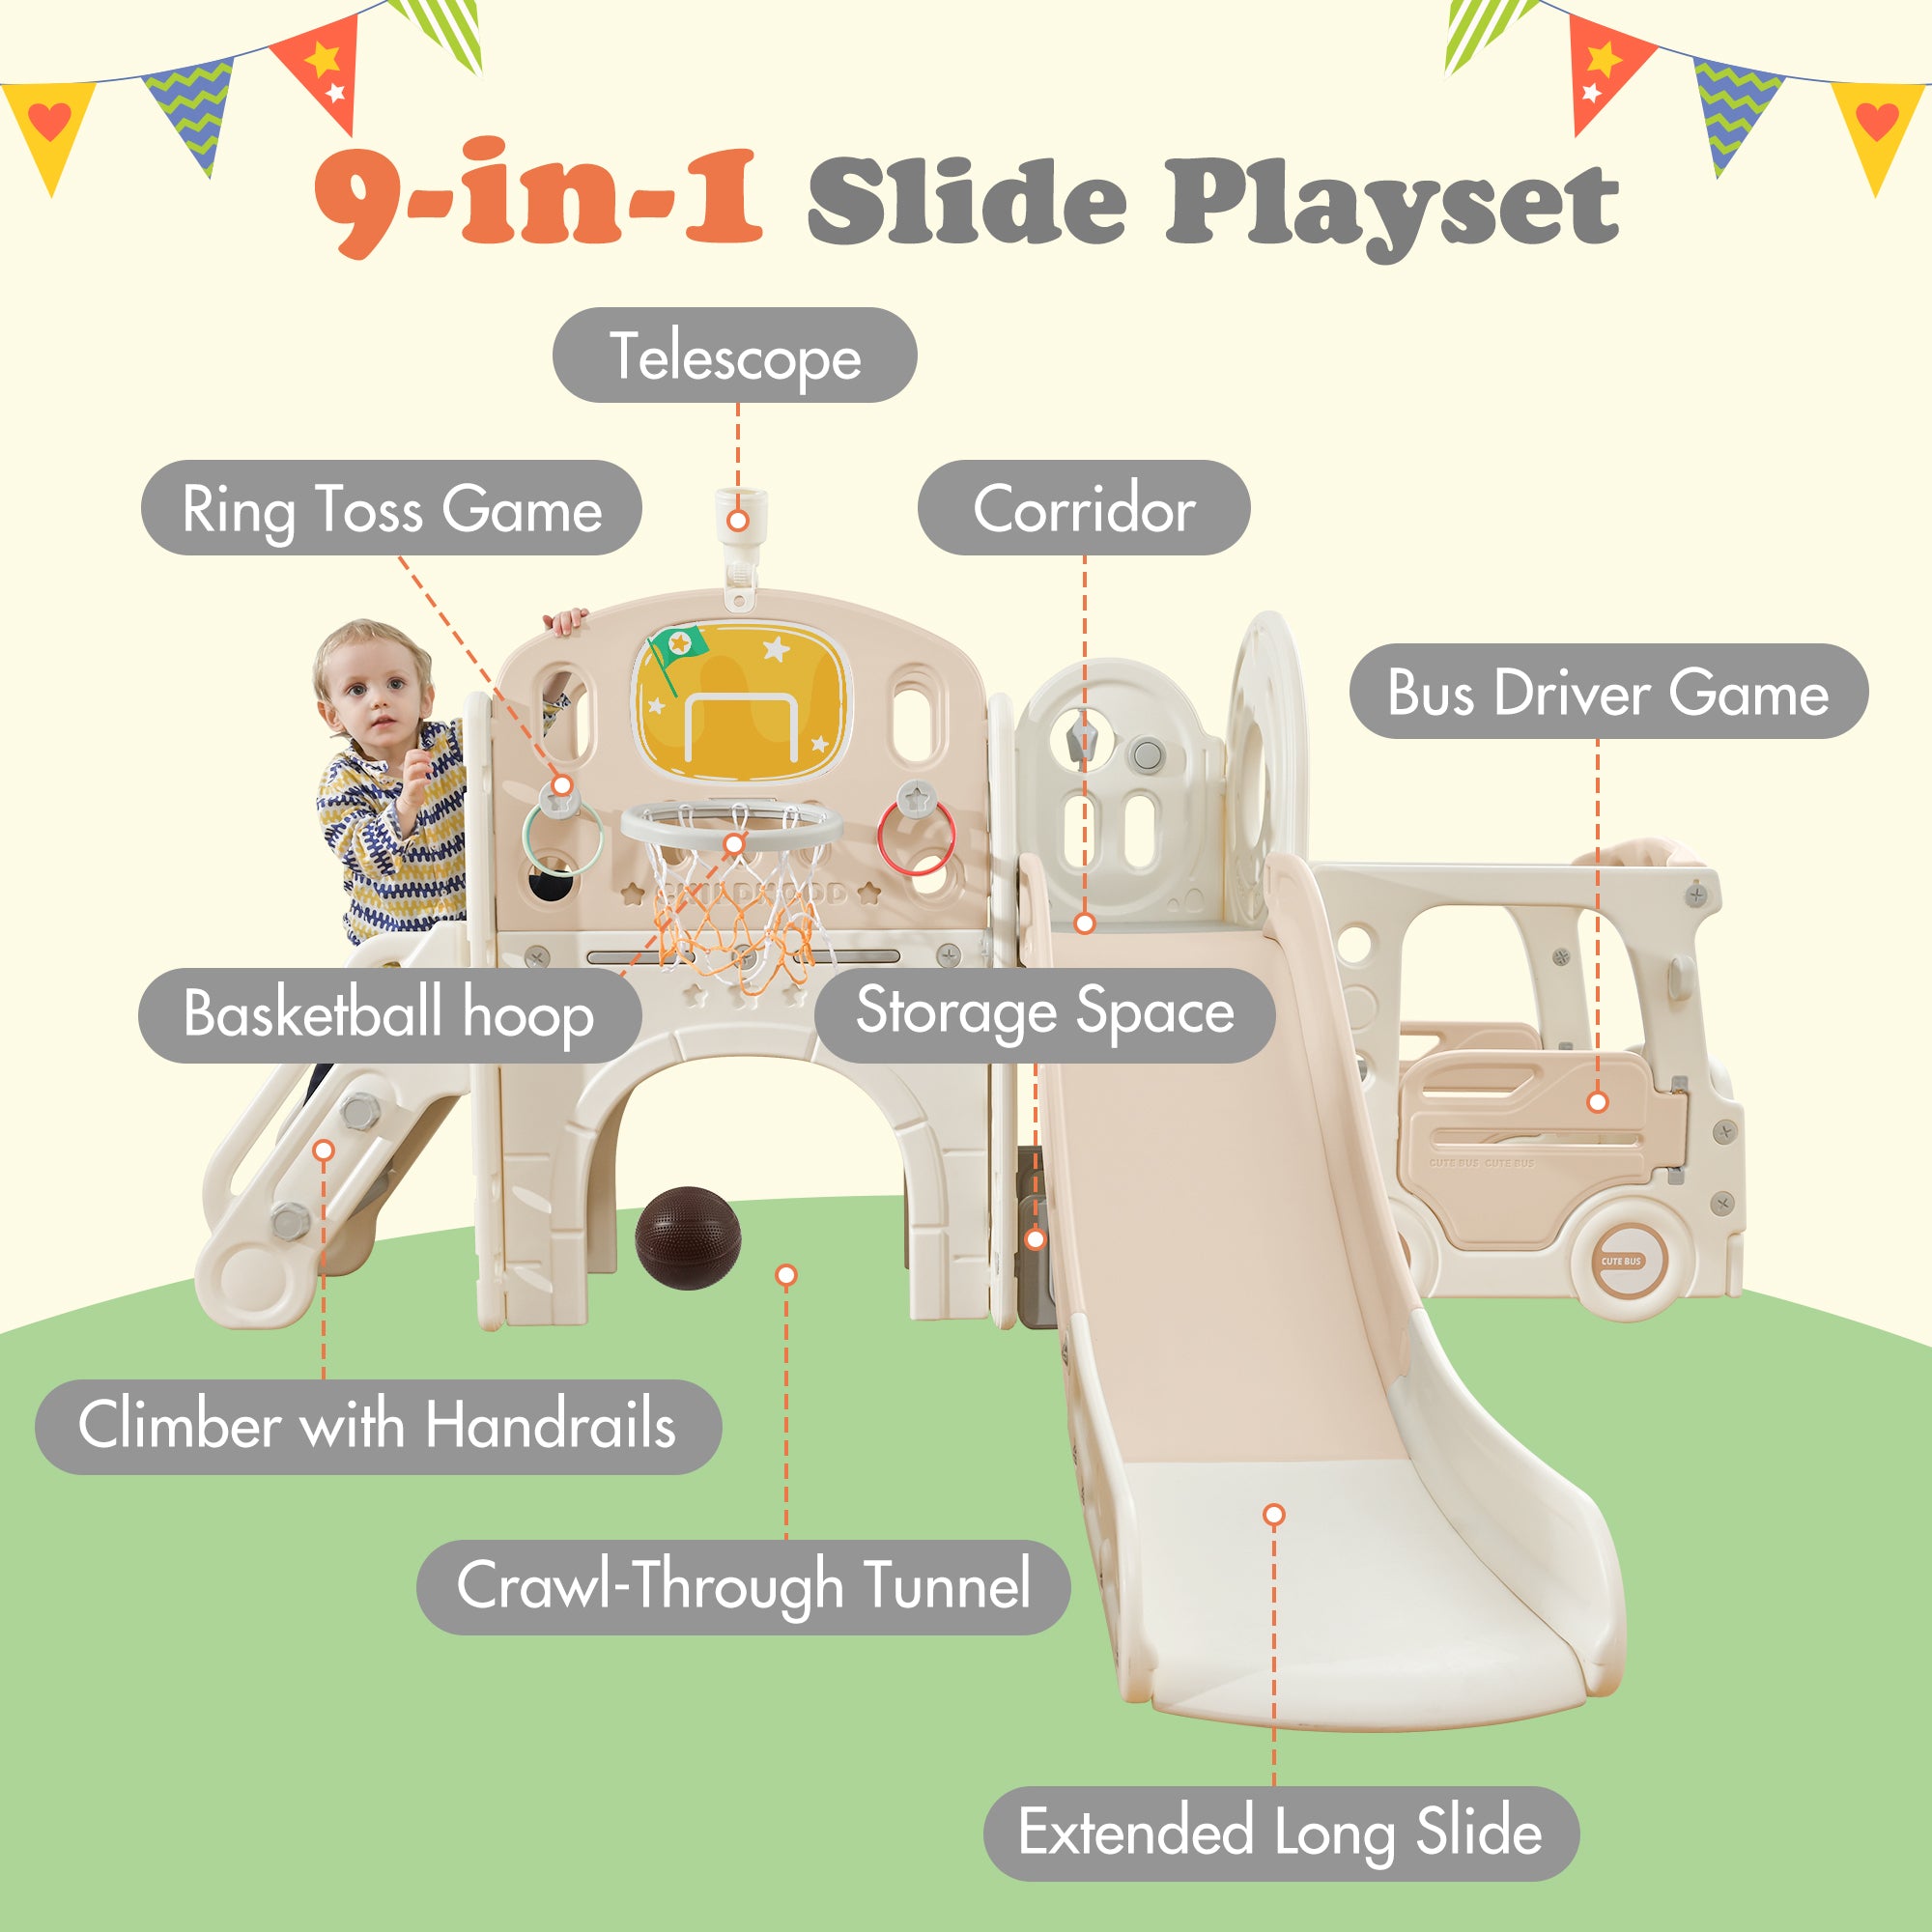 🆓🚛 Kids Slide Playset Structure 9 In 1, Freestanding Castle Climbing Crawling Playhouse With Slide, Arch Tunnel, Ring Toss, Realistic Bus Model & Basketball Hoop, Toy Storage Organizer for Toddlers, Pink & White